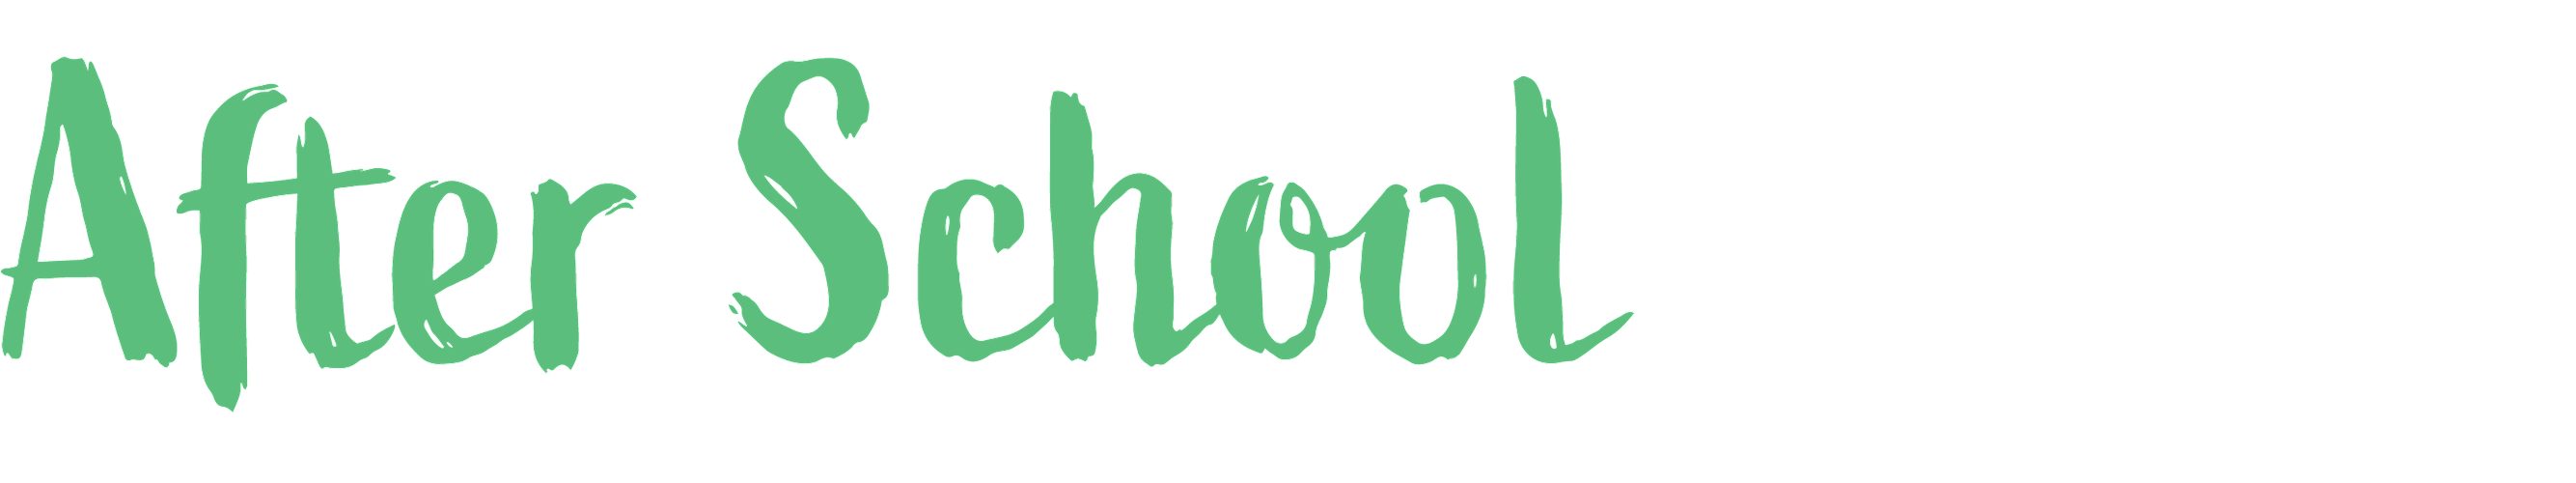 After_School_title_green.png